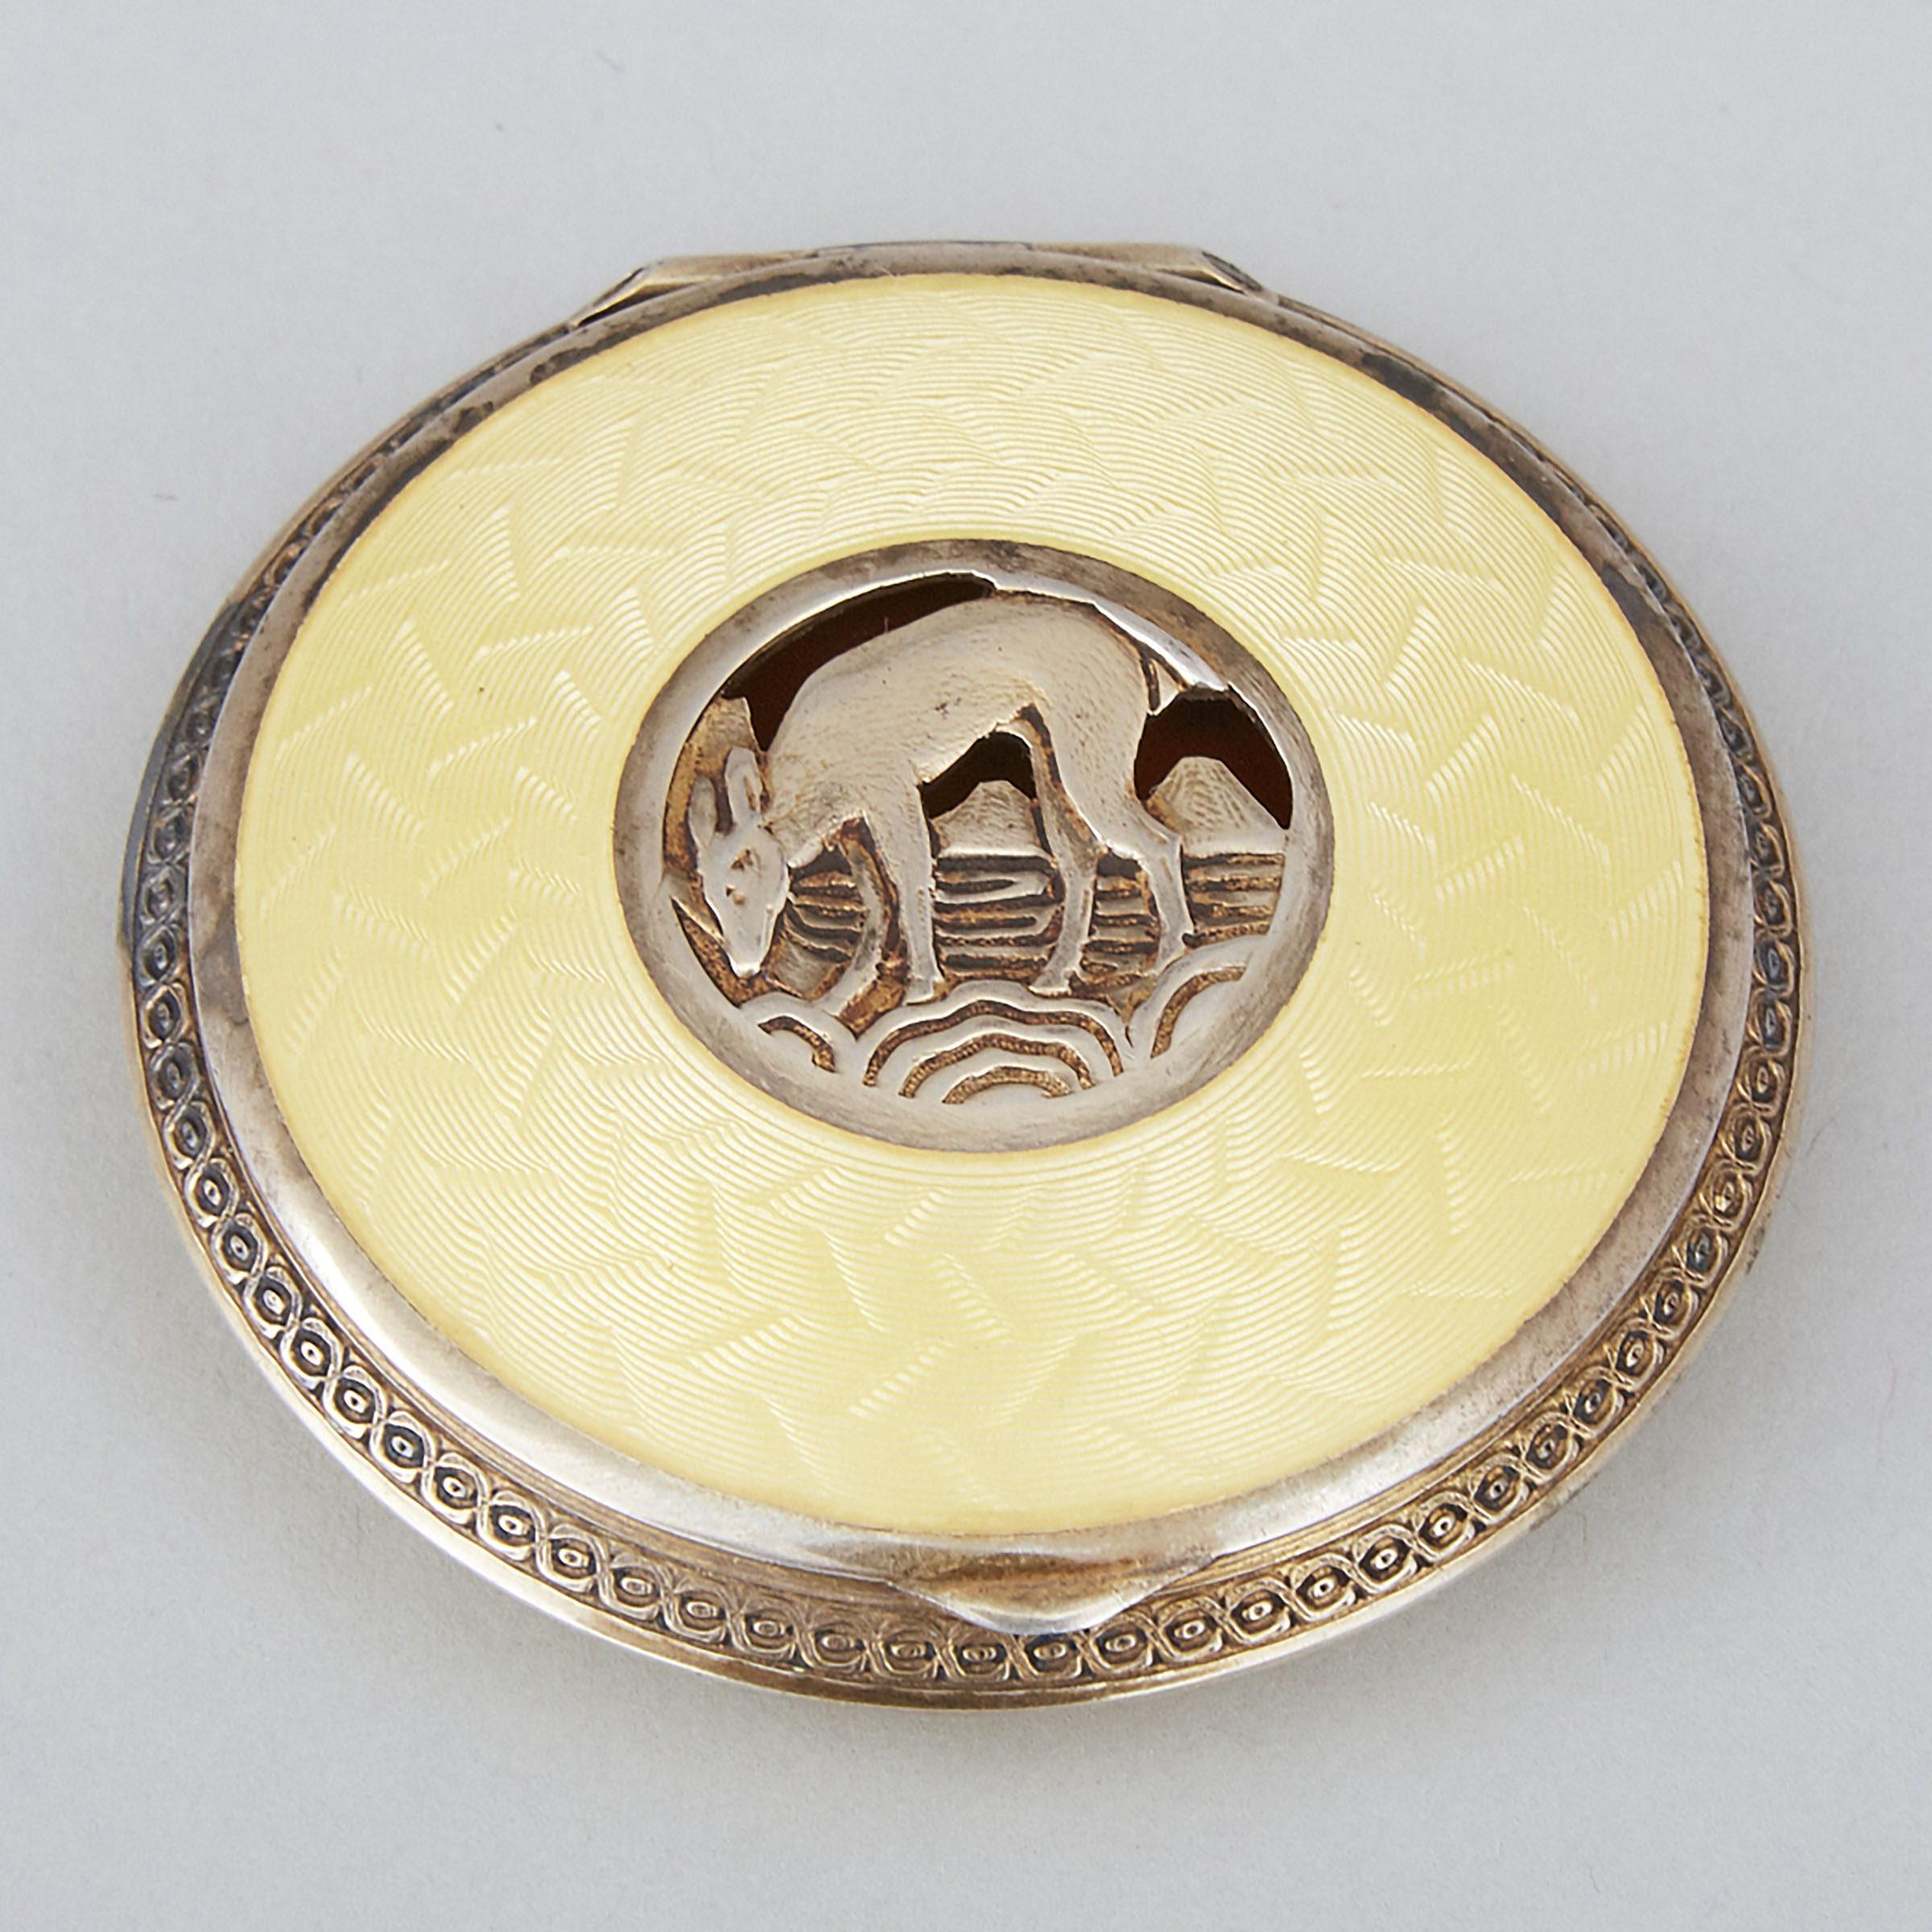 Continental Silver and Yellow Enamel Circular Compact, 20th century